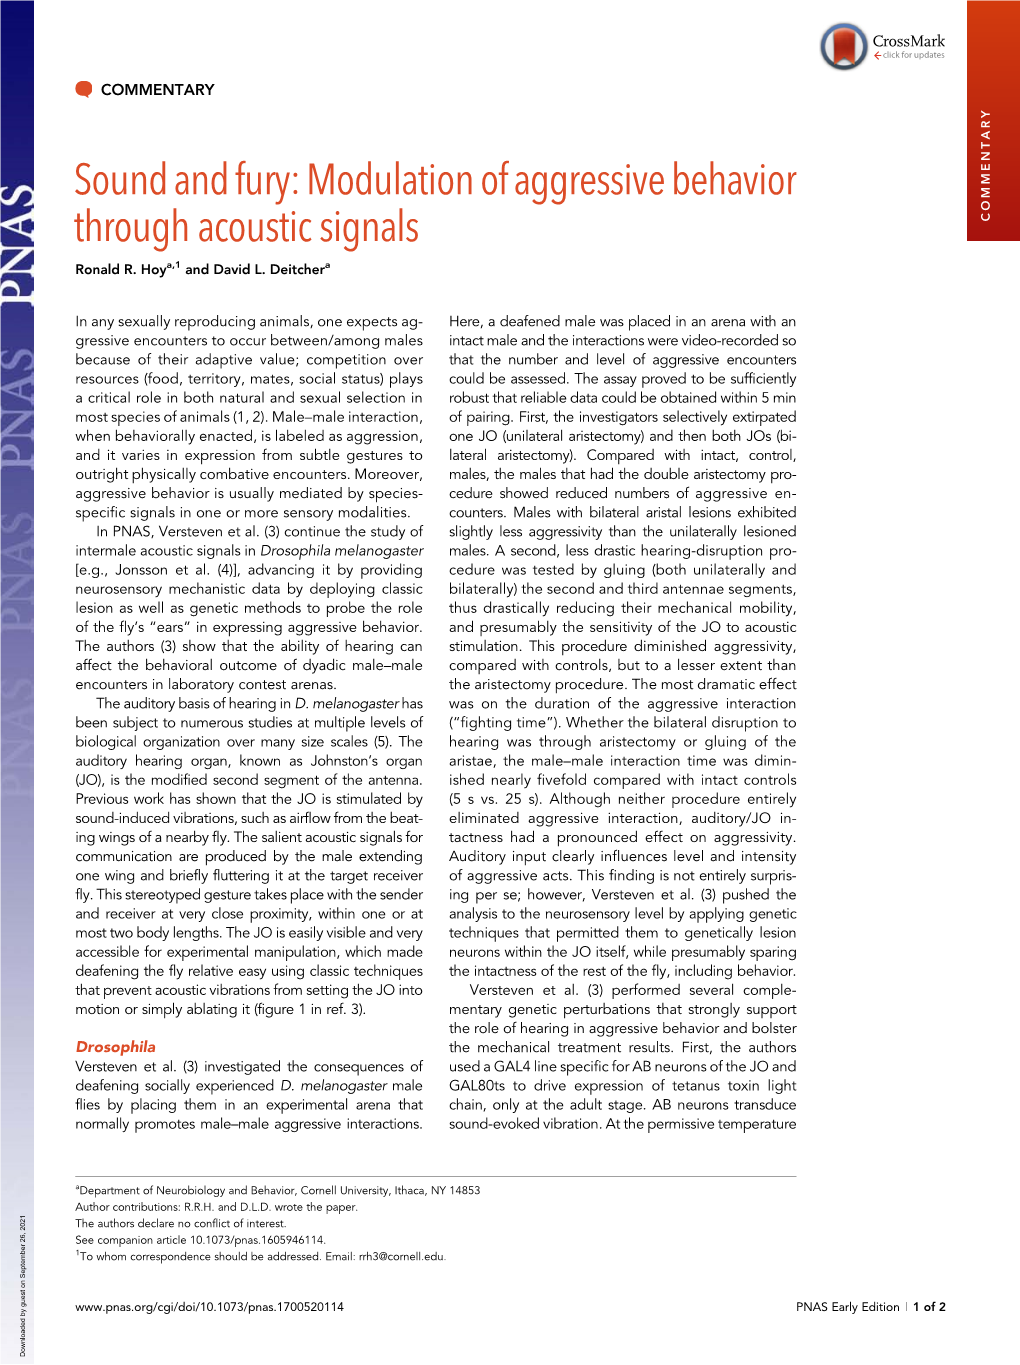 Modulation of Aggressive Behavior Through Acoustic Signals COMMENTARY Ronald R